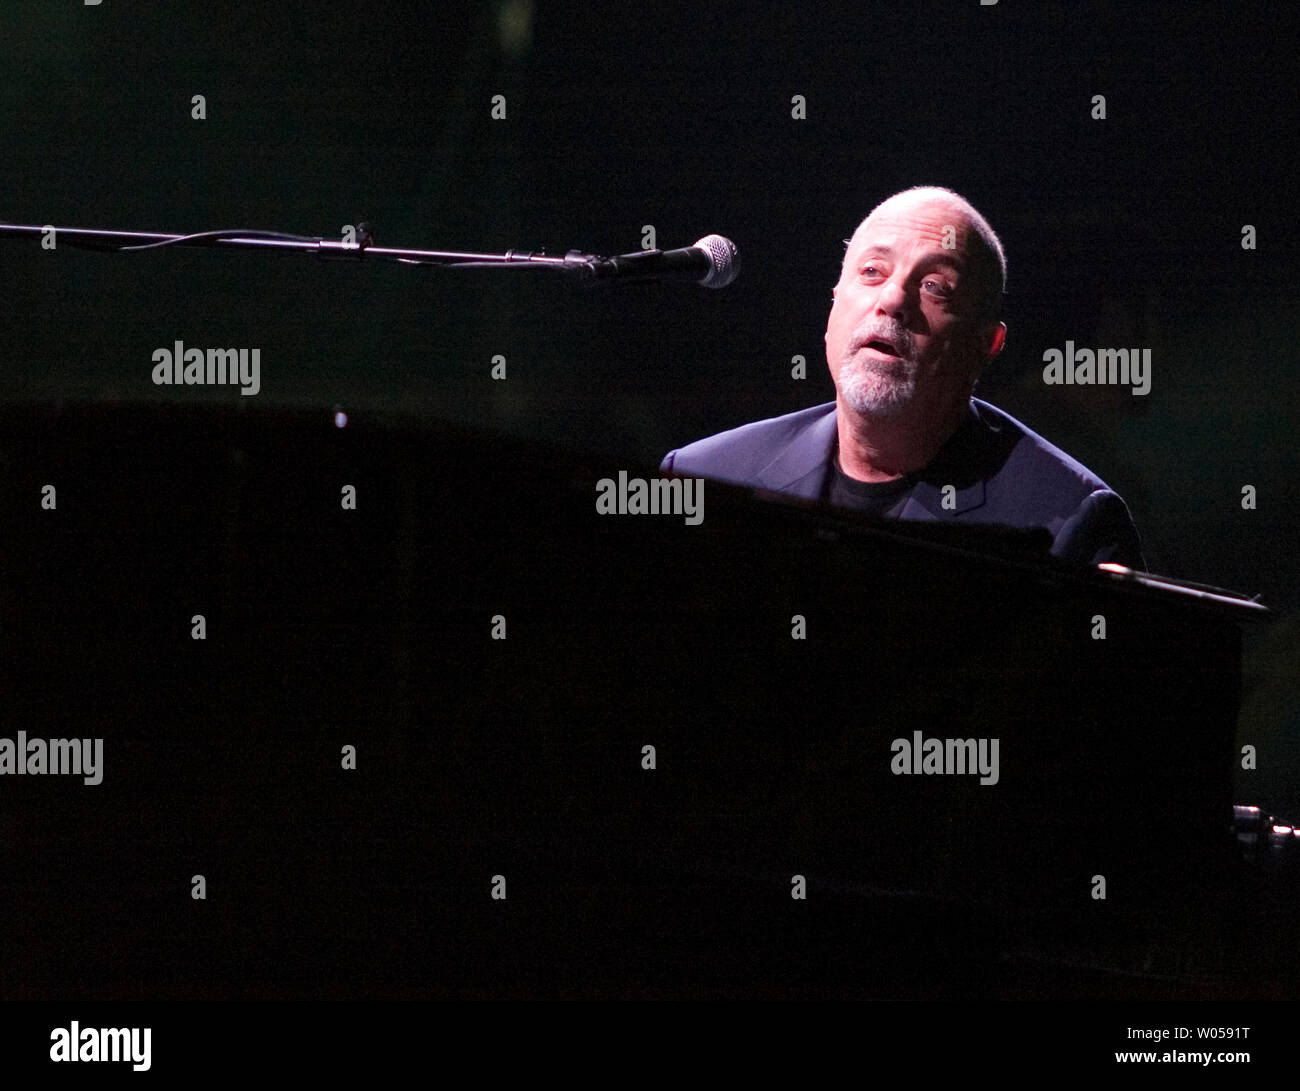 Billy Joel performs 'Angry Young Man' at the Key Arena in Seattle on November 8, 2007. Seattle was the 4th stop on a tour of 15 cities throughout Canada, United States and Mexico.  (UPI Photo/Jim Bryant) Stock Photo